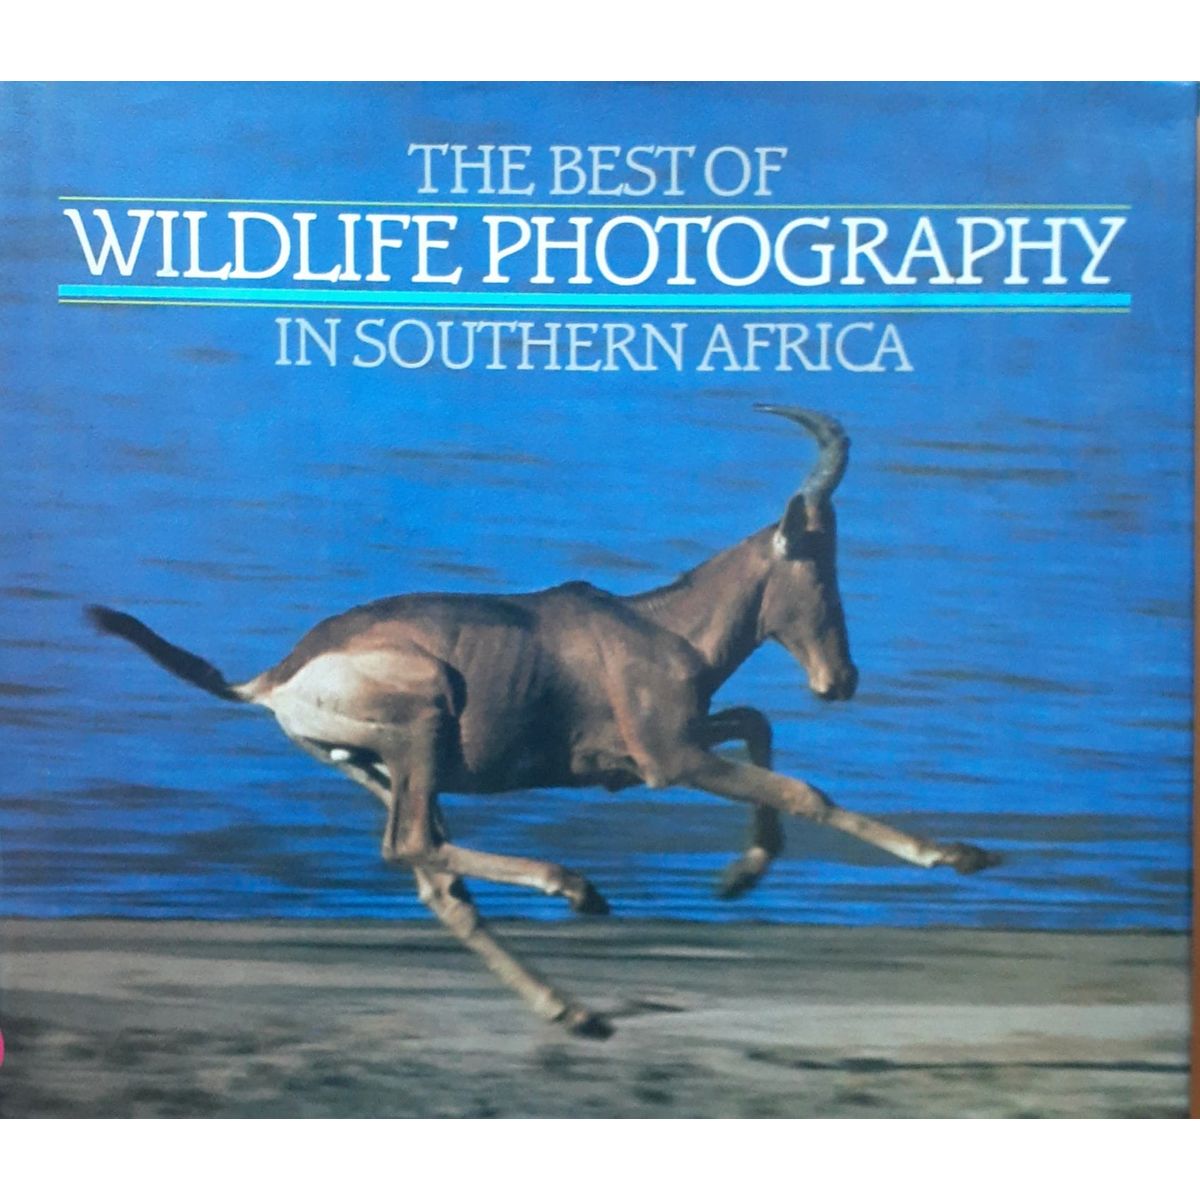 ISBN: 9780620084109 / 0620084103 - The Best of Wildlife Photography in Southern Africa by Peter Joyce [1988]